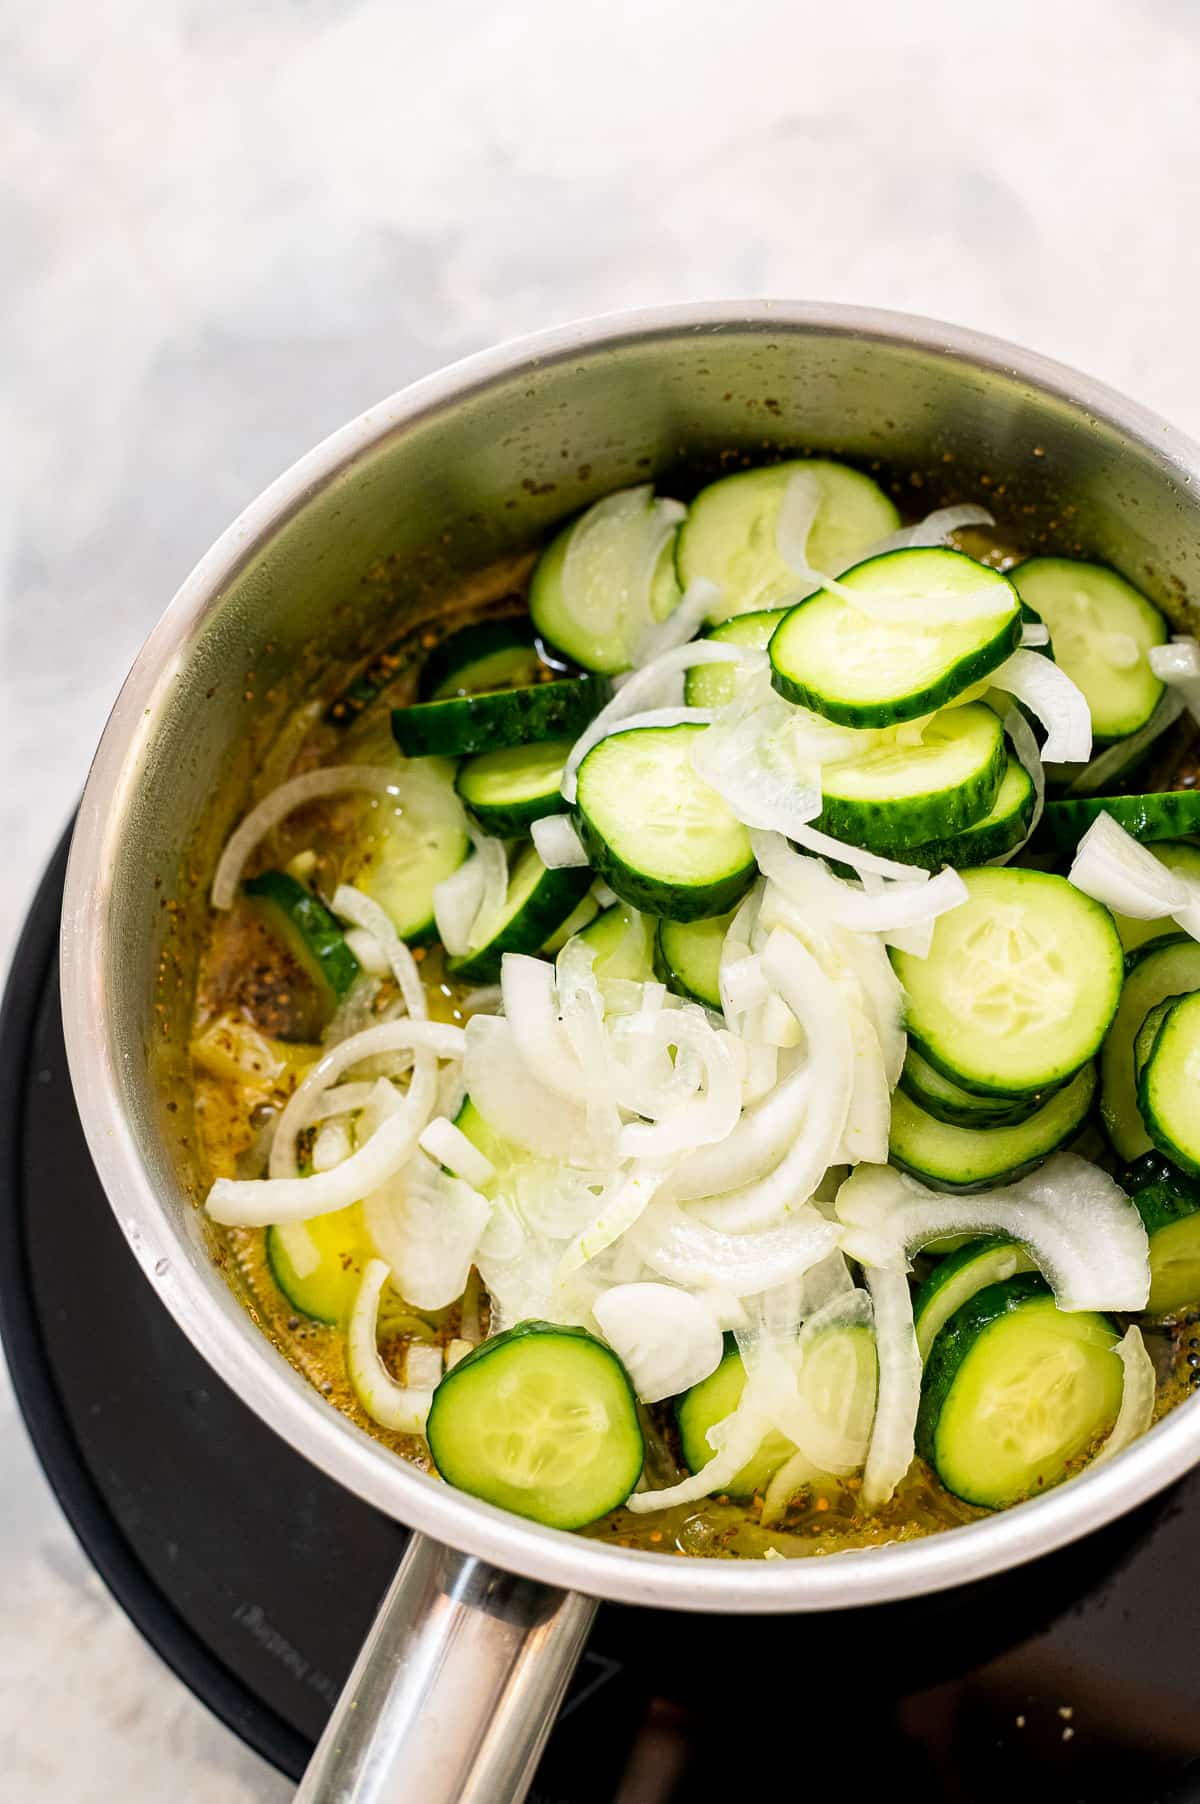 Saucepan with cucumbers, onions and vinegar mixture